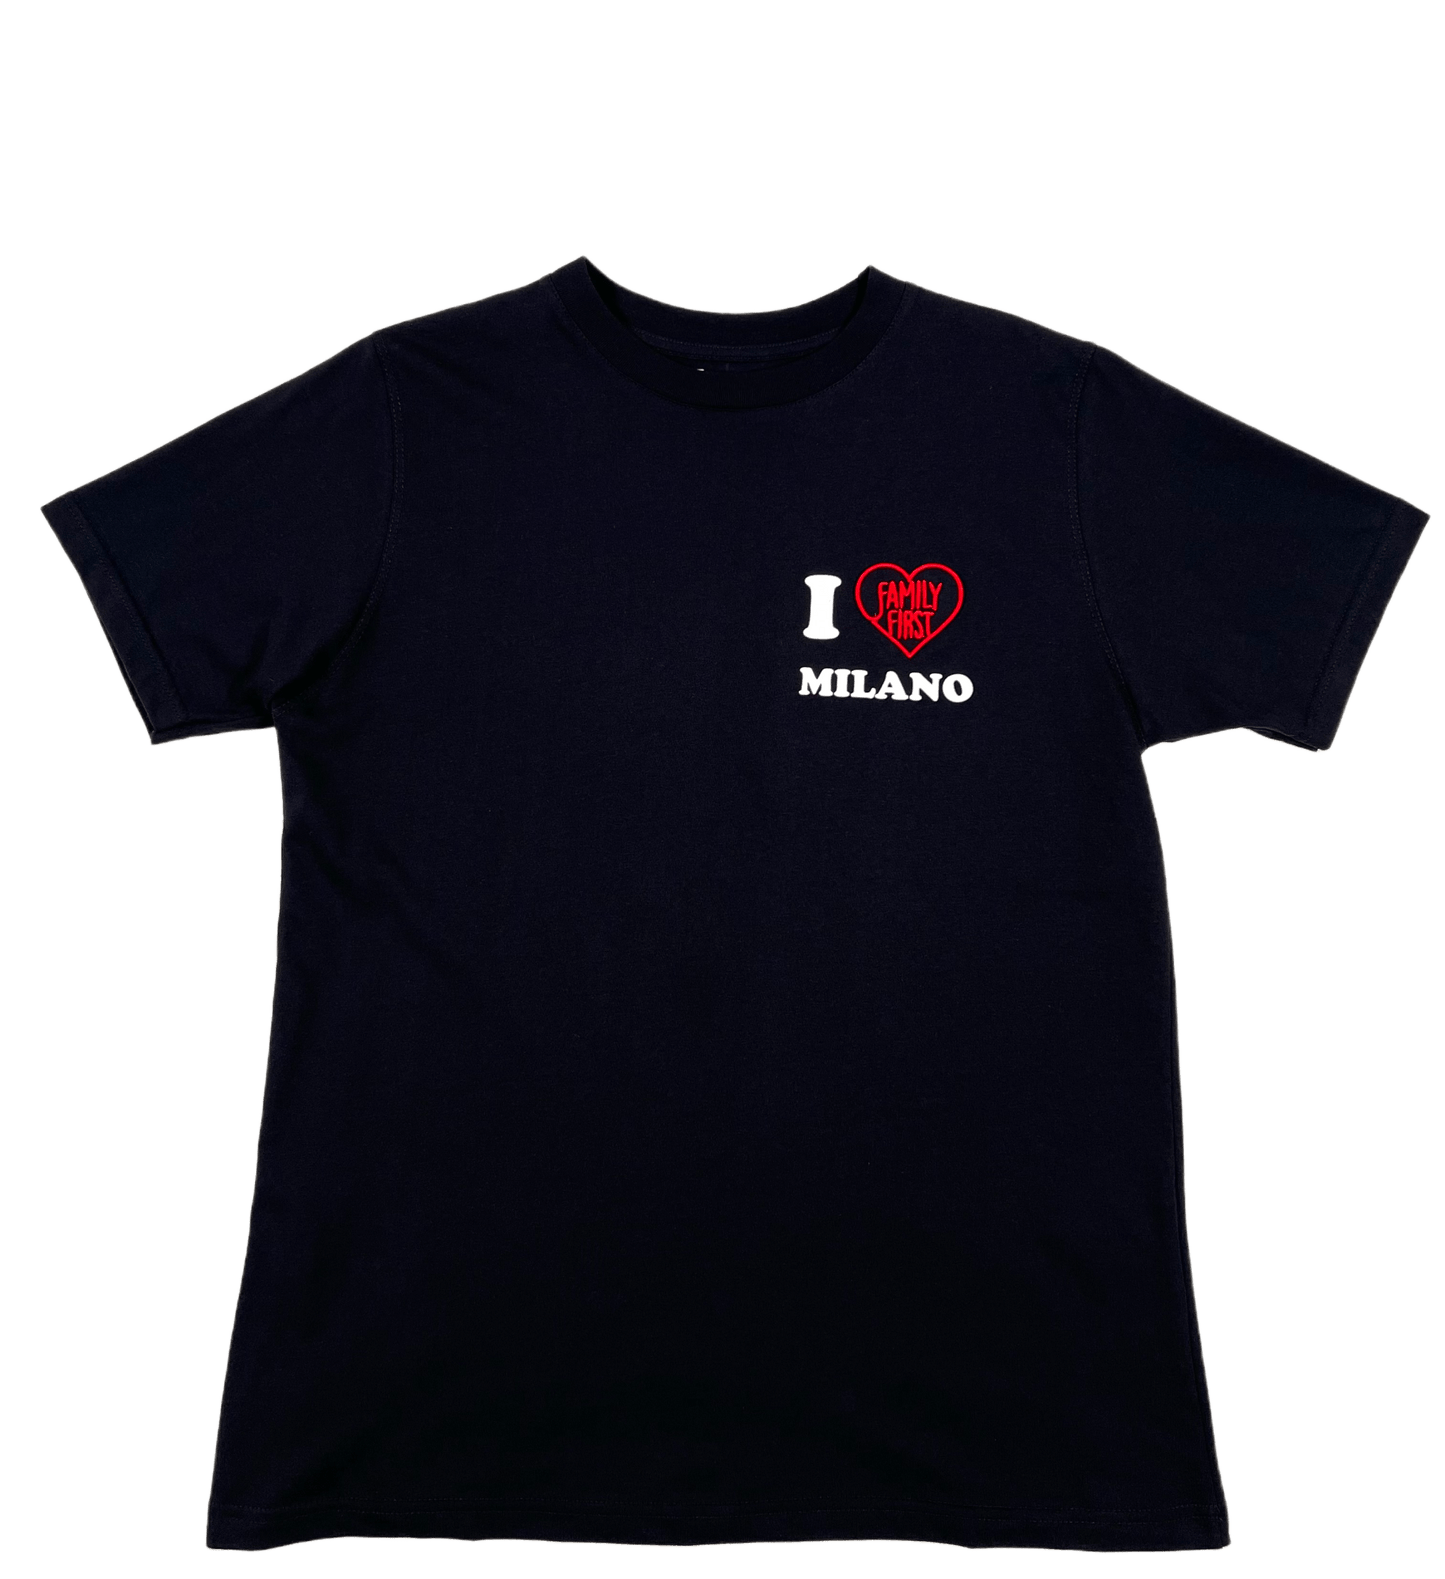 A black embroidered FAMILY FIRST TF2213 t-shirt with the words "FAMILY FIRST" on it.